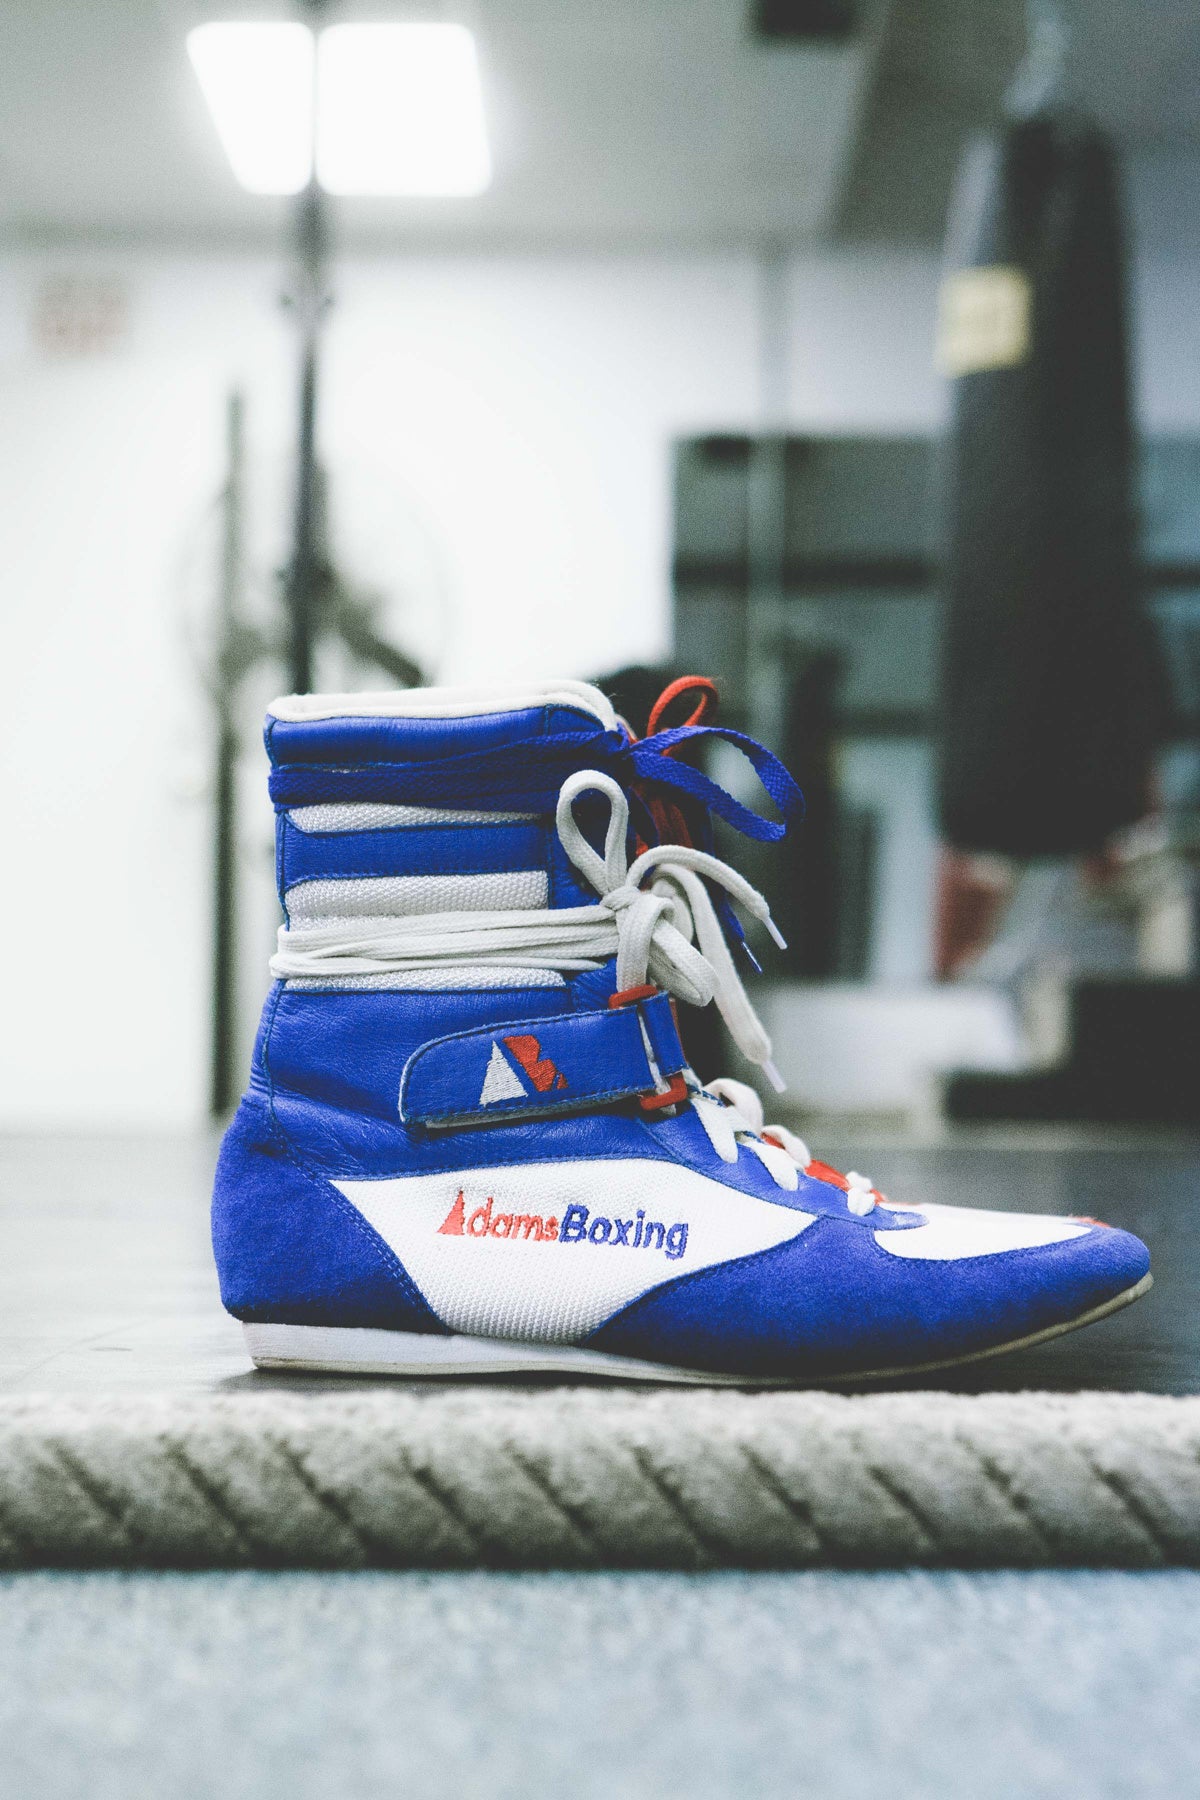 Adams Boxing promises the most comfortable boxing shoes